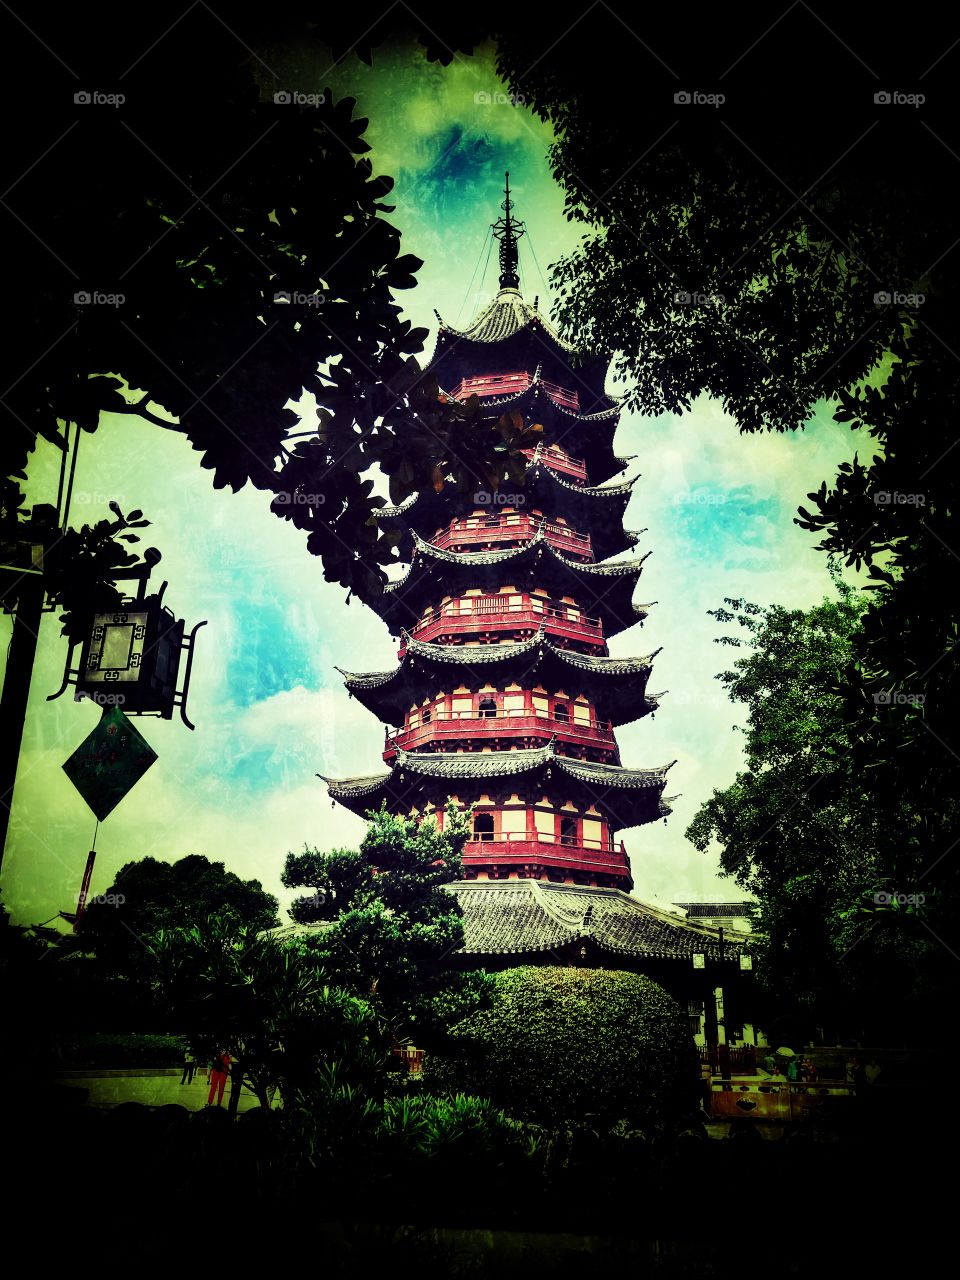 Timeless pagoda in the ancient city of Suzhou... it has been there over centuries and continues today... 苏州古代建筑，苏州老城